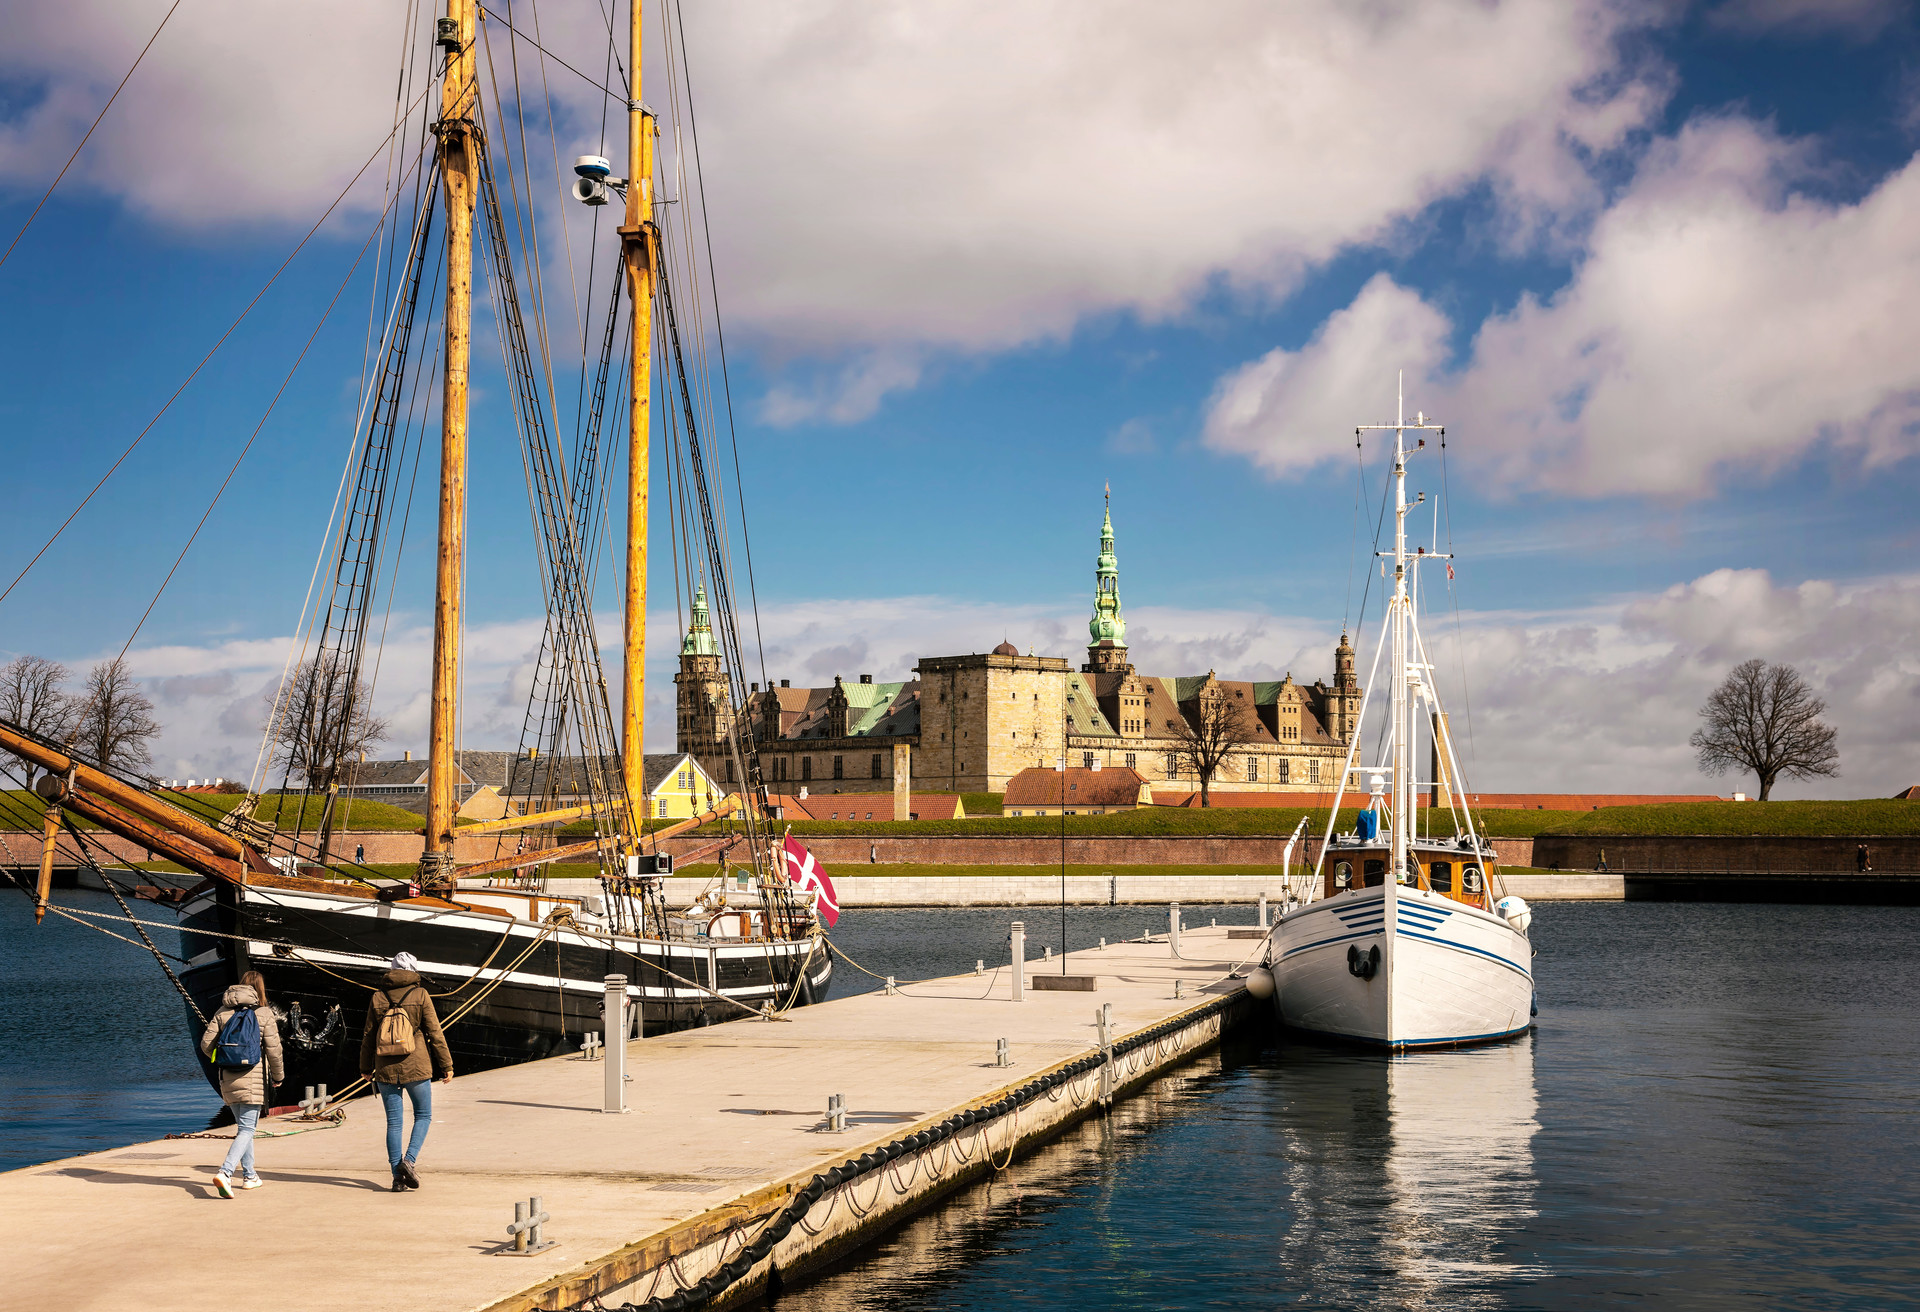 View of Kronborg castle and sail boats in the harbour of Helsingor, Denmark.; Shutterstock ID 1357967771